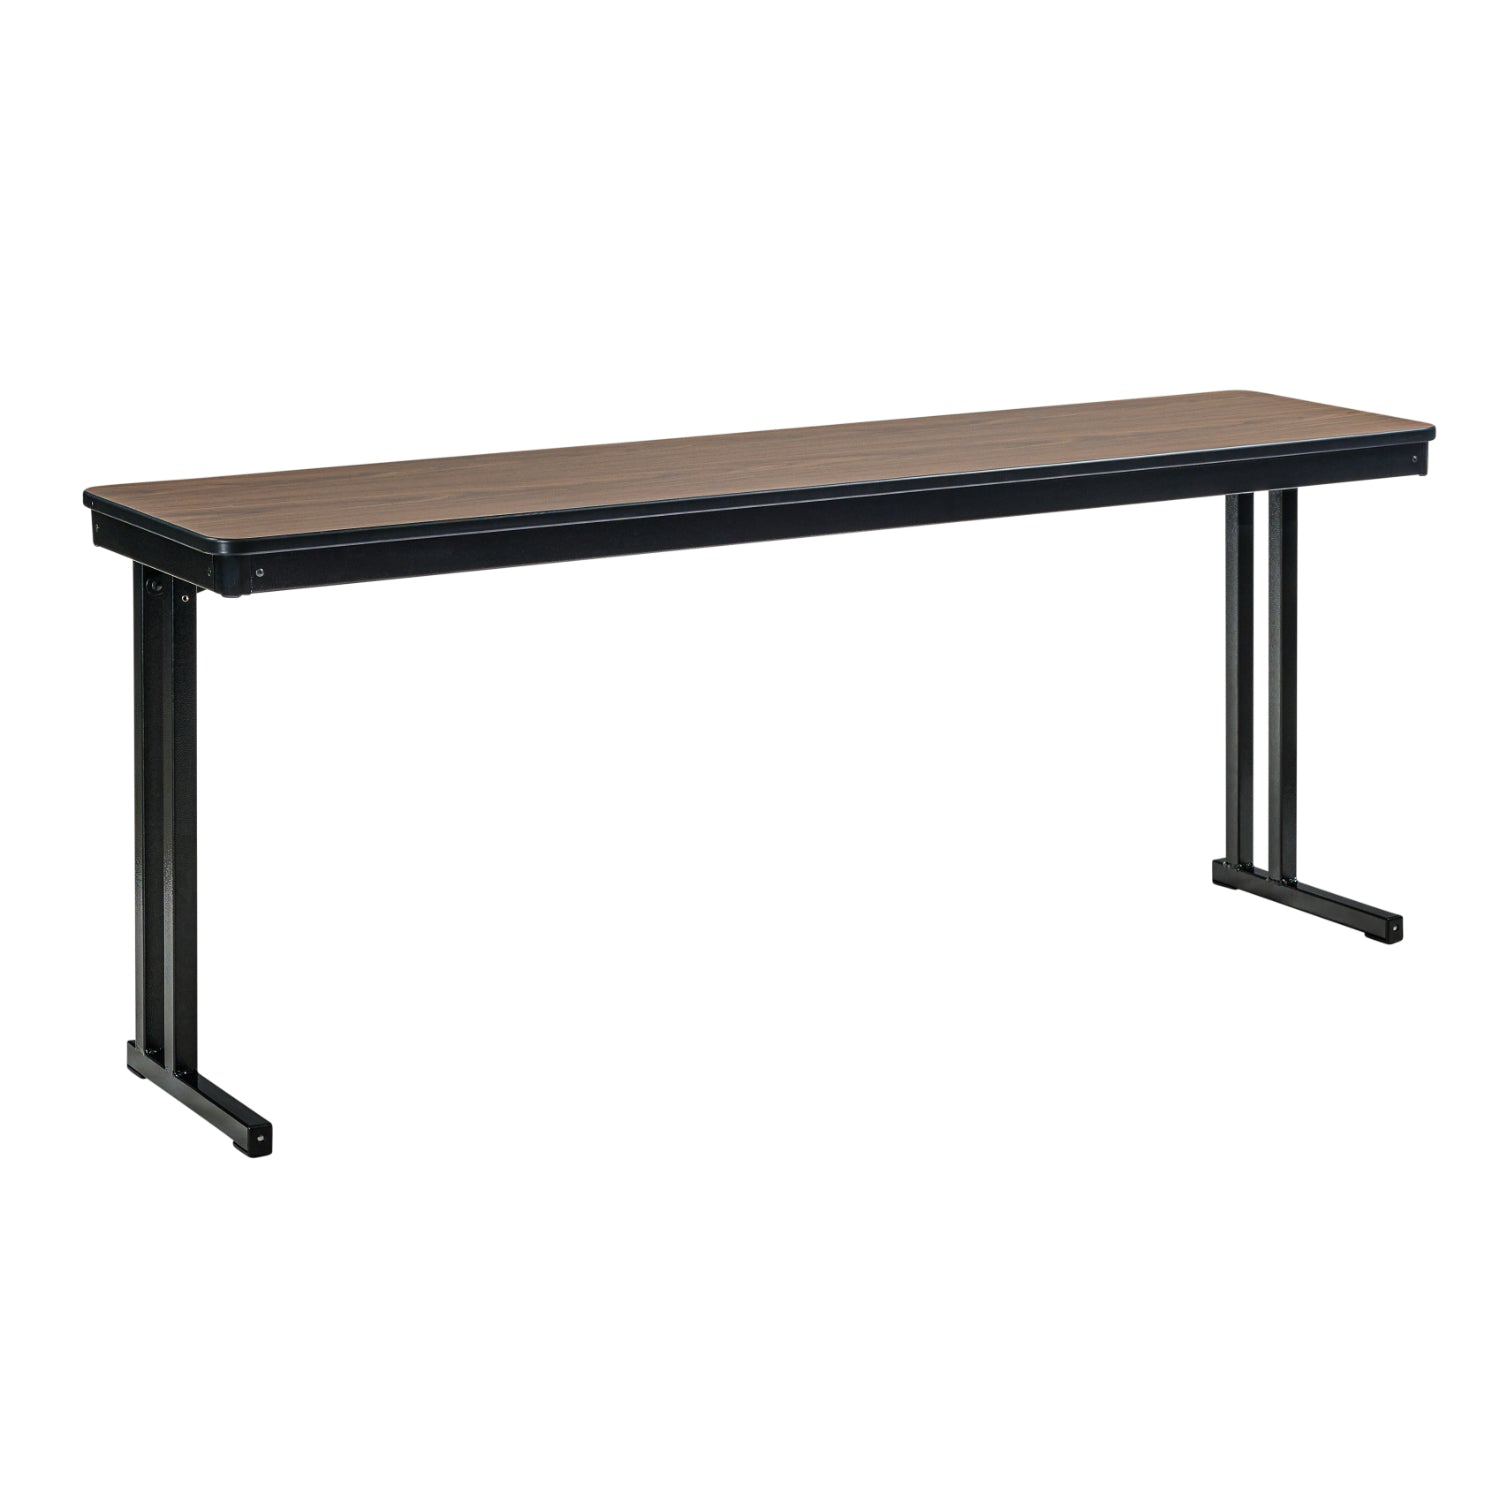 Max Seating Folding Training and Seminar Table with Cantilever Legs, 24" x 60", High Pressure Laminate Top with MDF Core/ProtectEdge